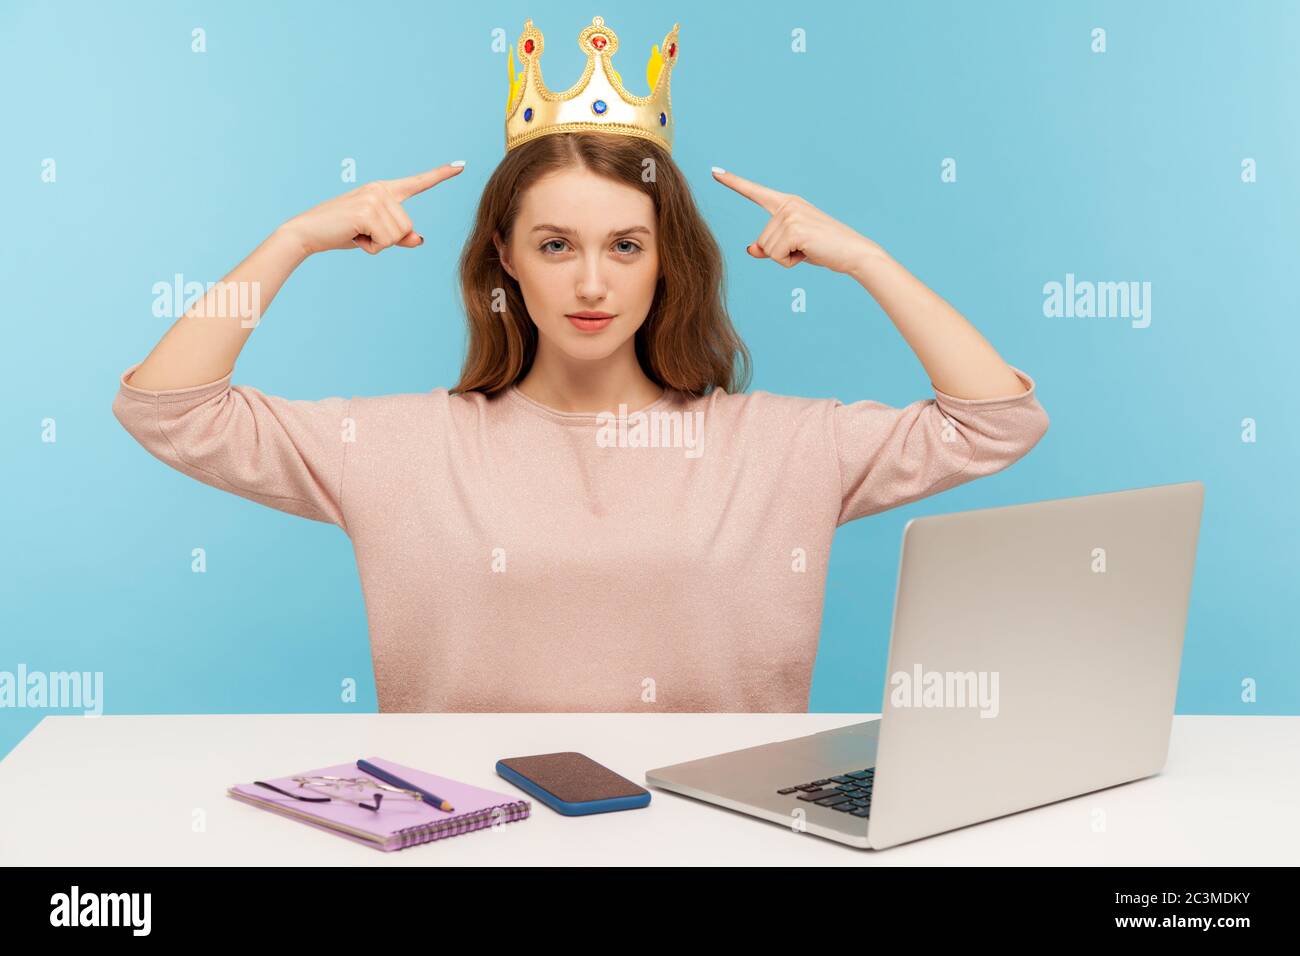 Look, I am boss here! Proud ambitious egoistic narcissistic businesswoman pointing at crown on head and looking with arrogance, over-inflated ego. ind Stock Photo